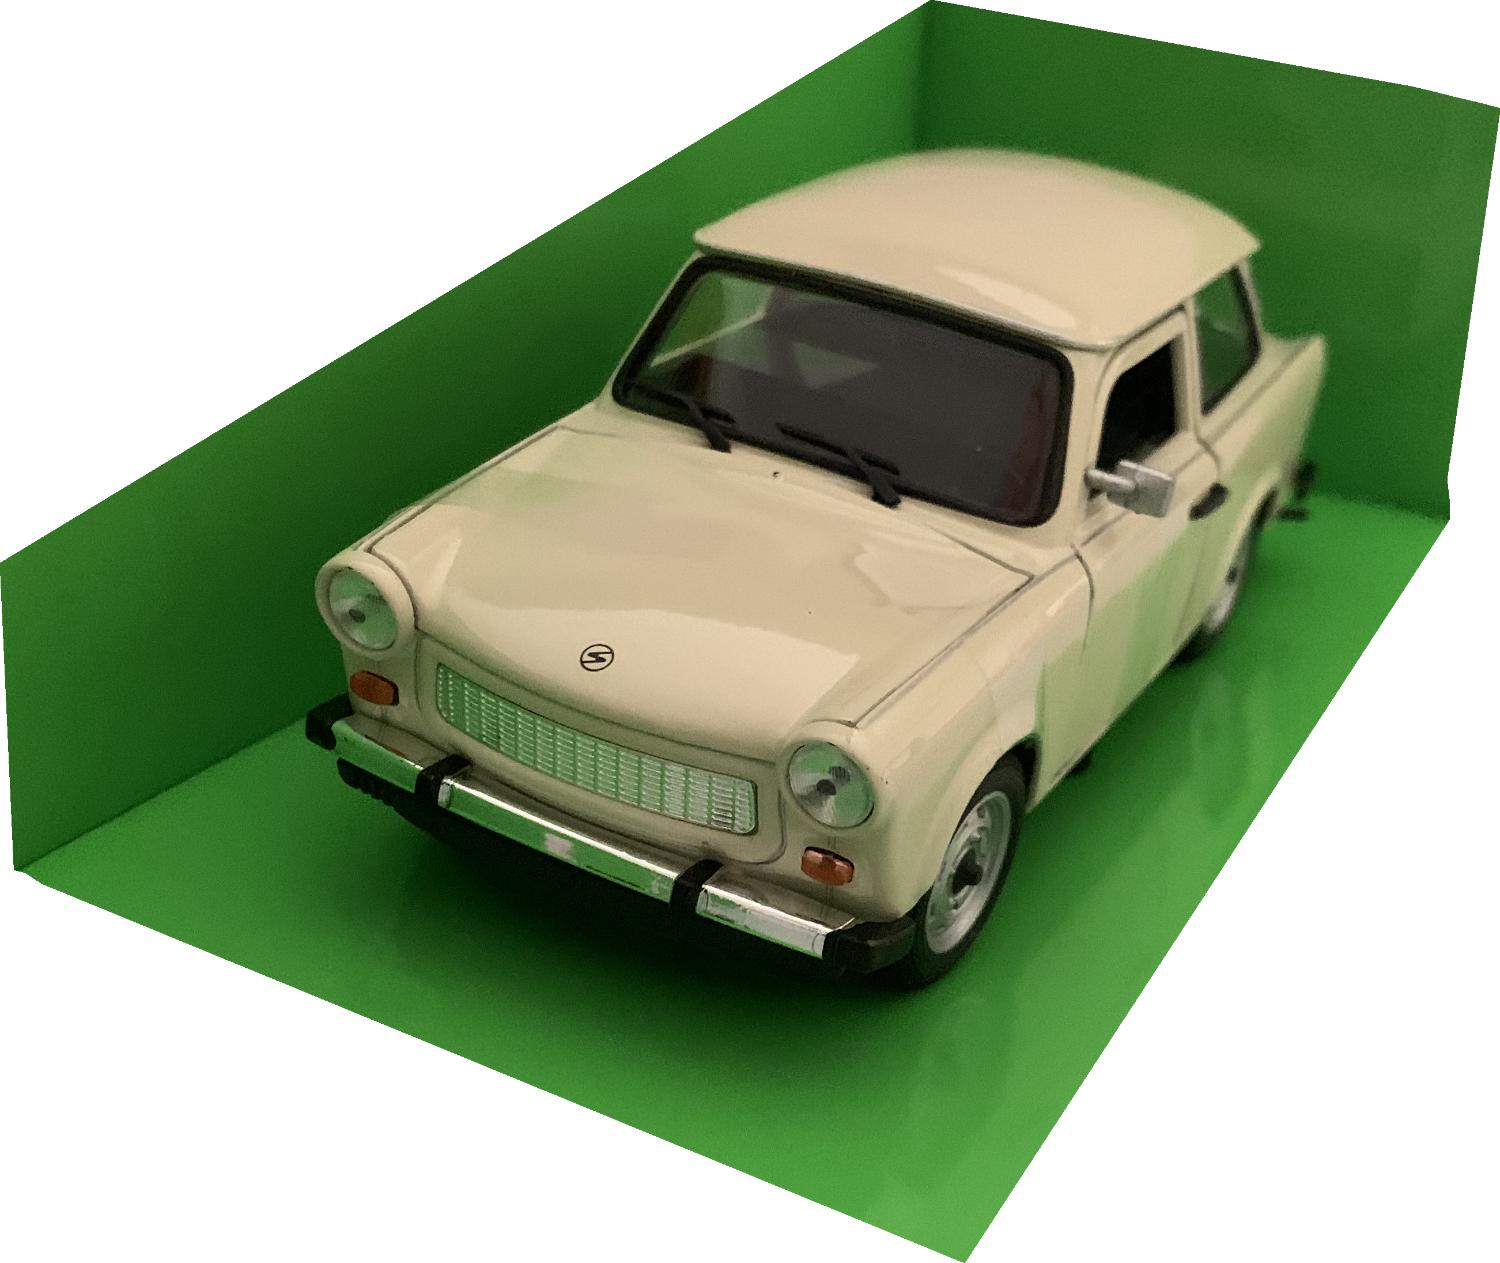 Trabant 601 in Beige 1:24 scale model  from welly